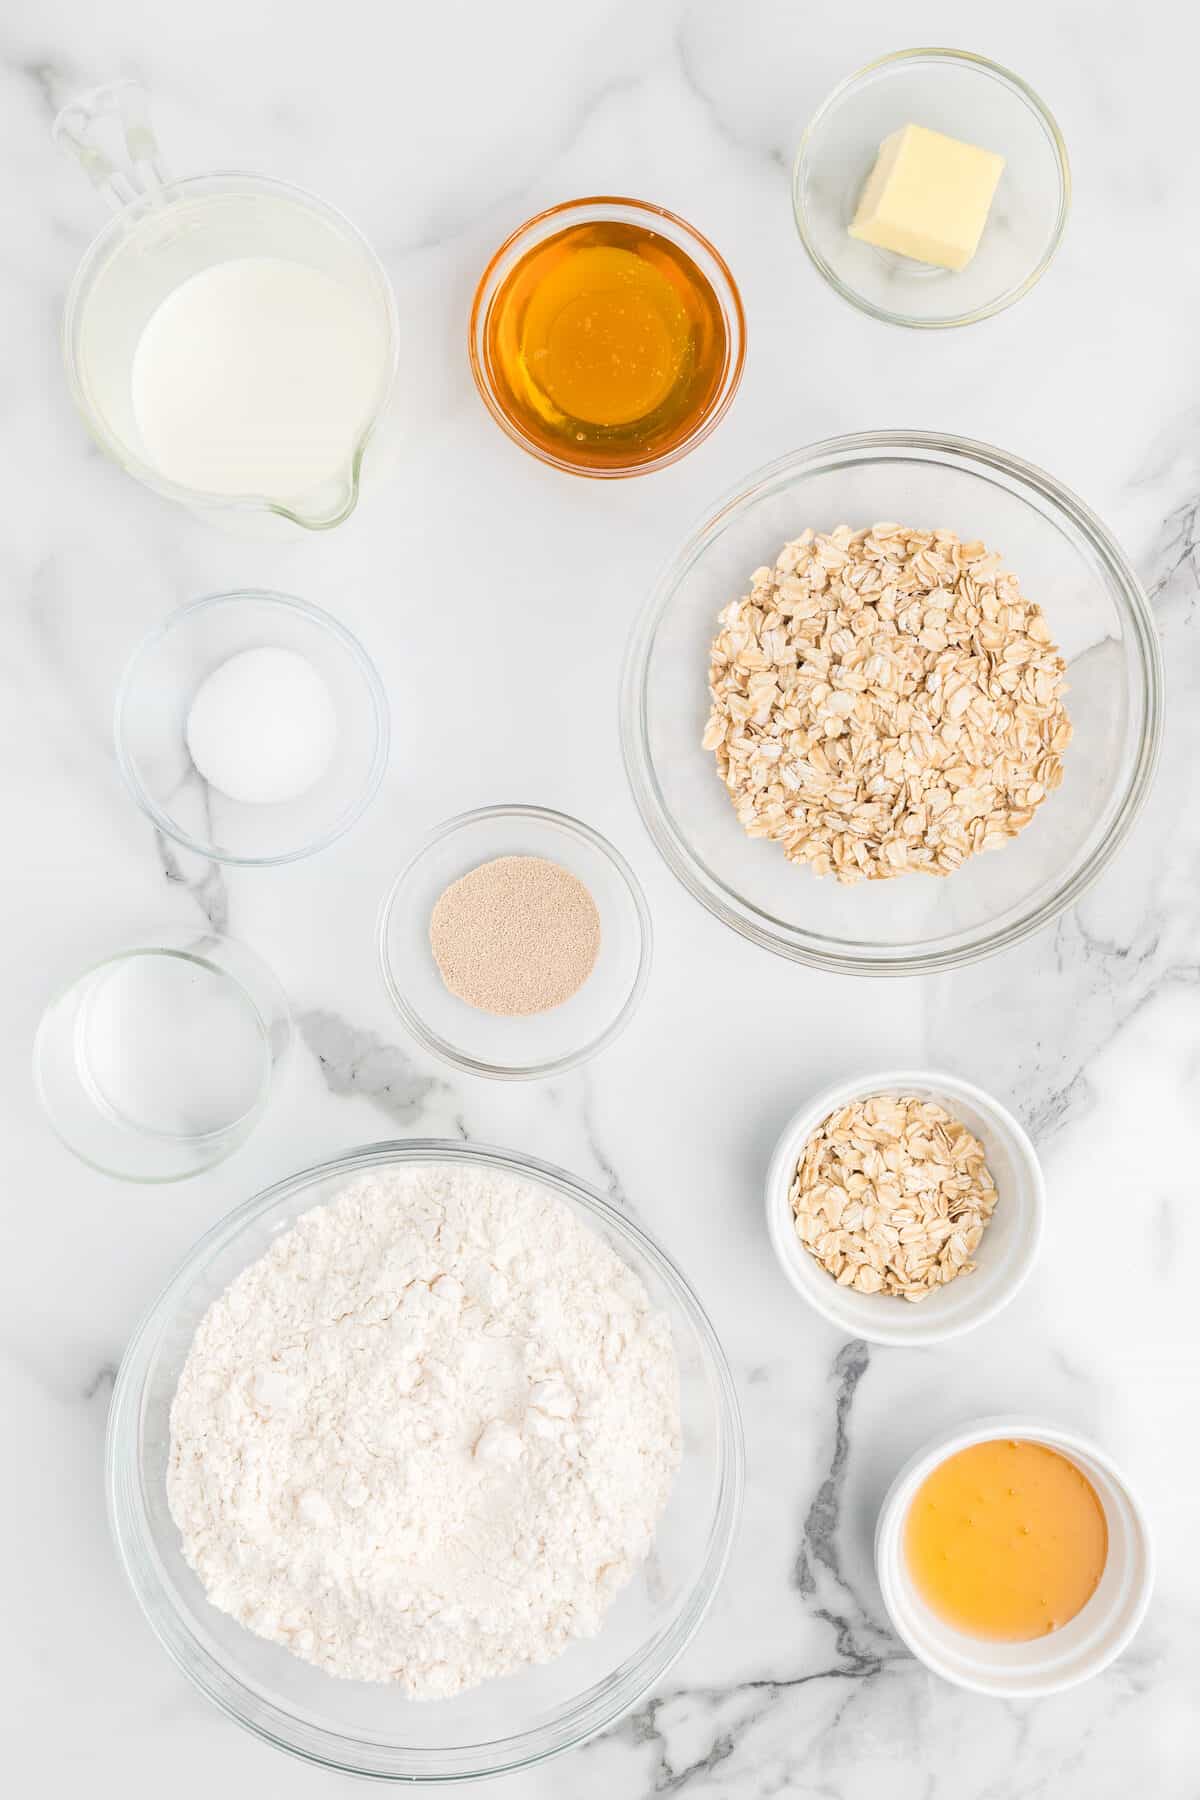 ingredients for honey oat bread in small bowls.